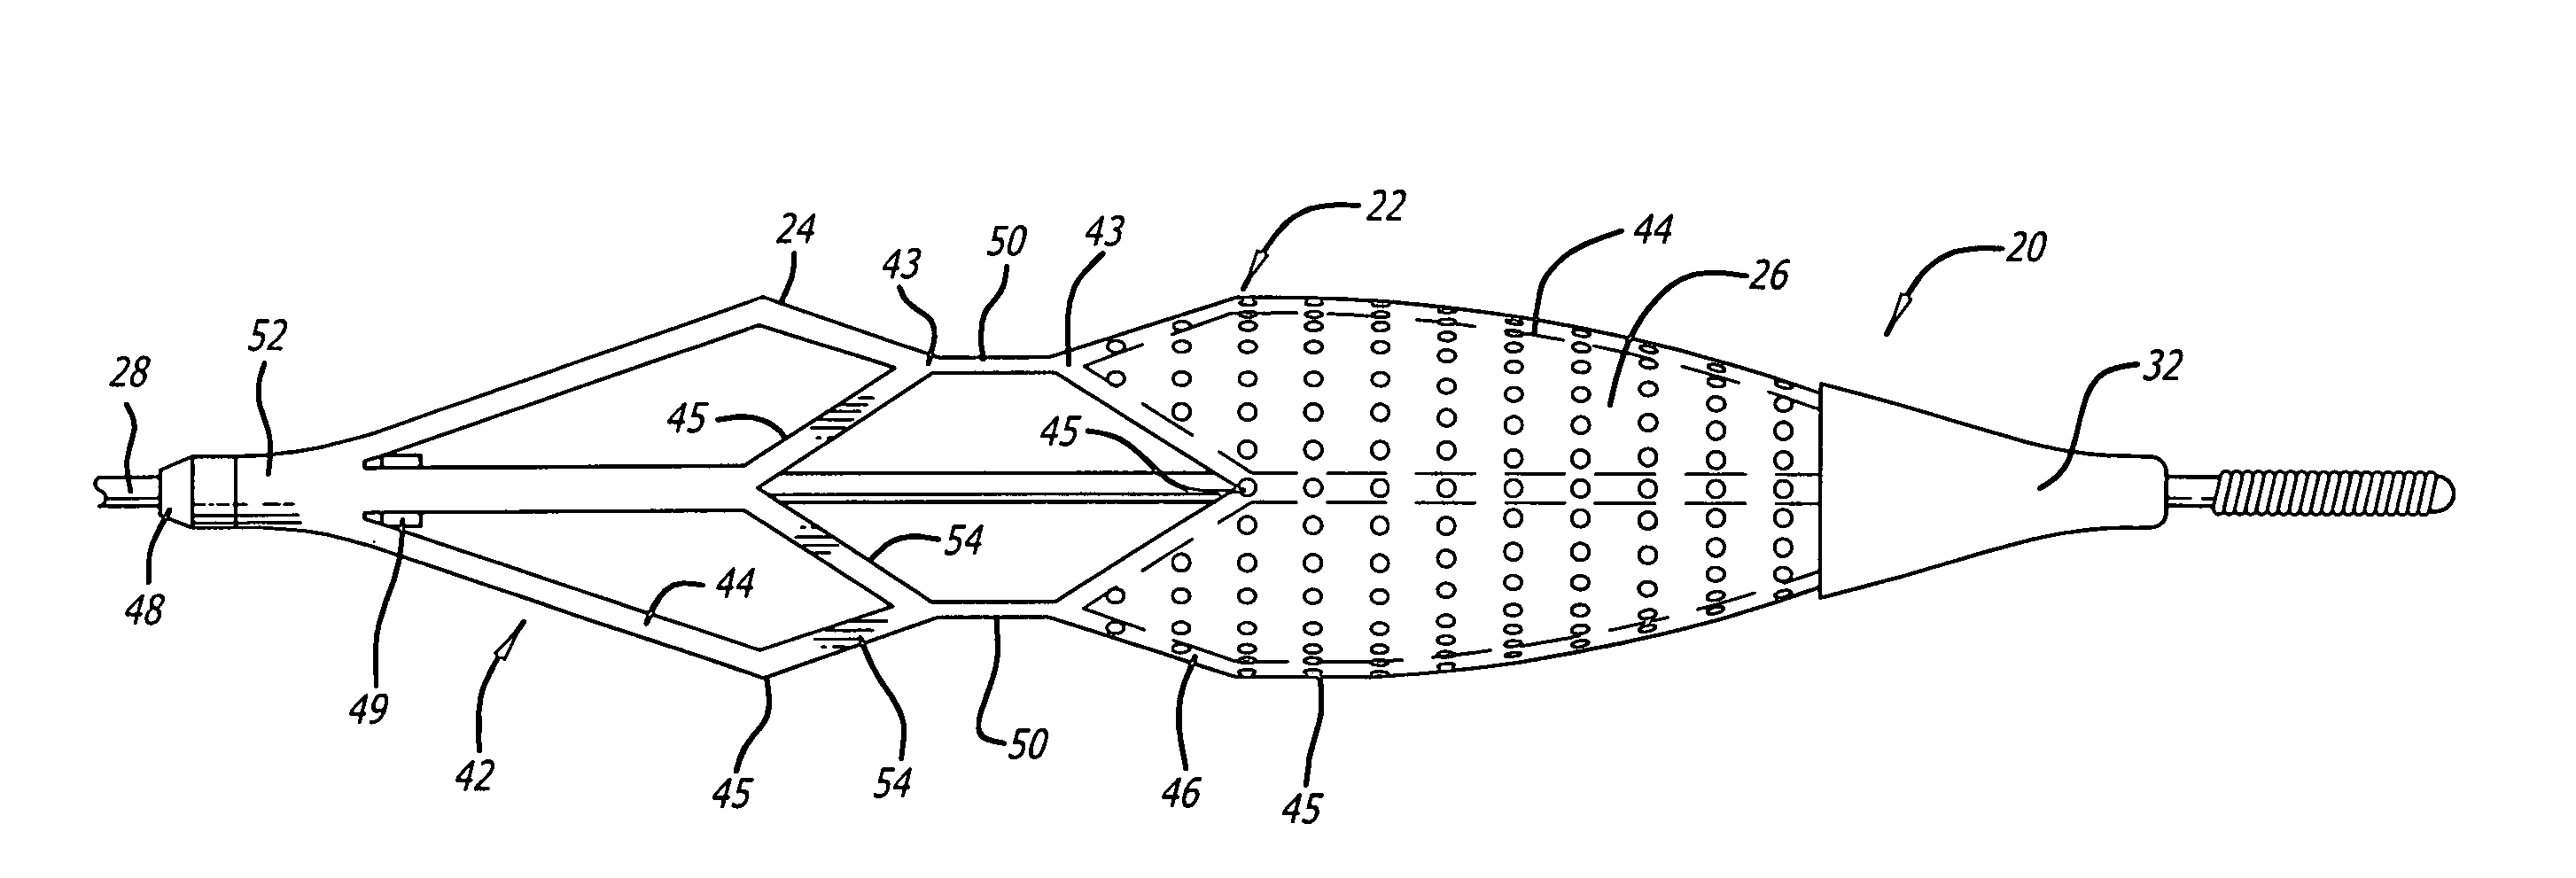 Embolic filtering devices